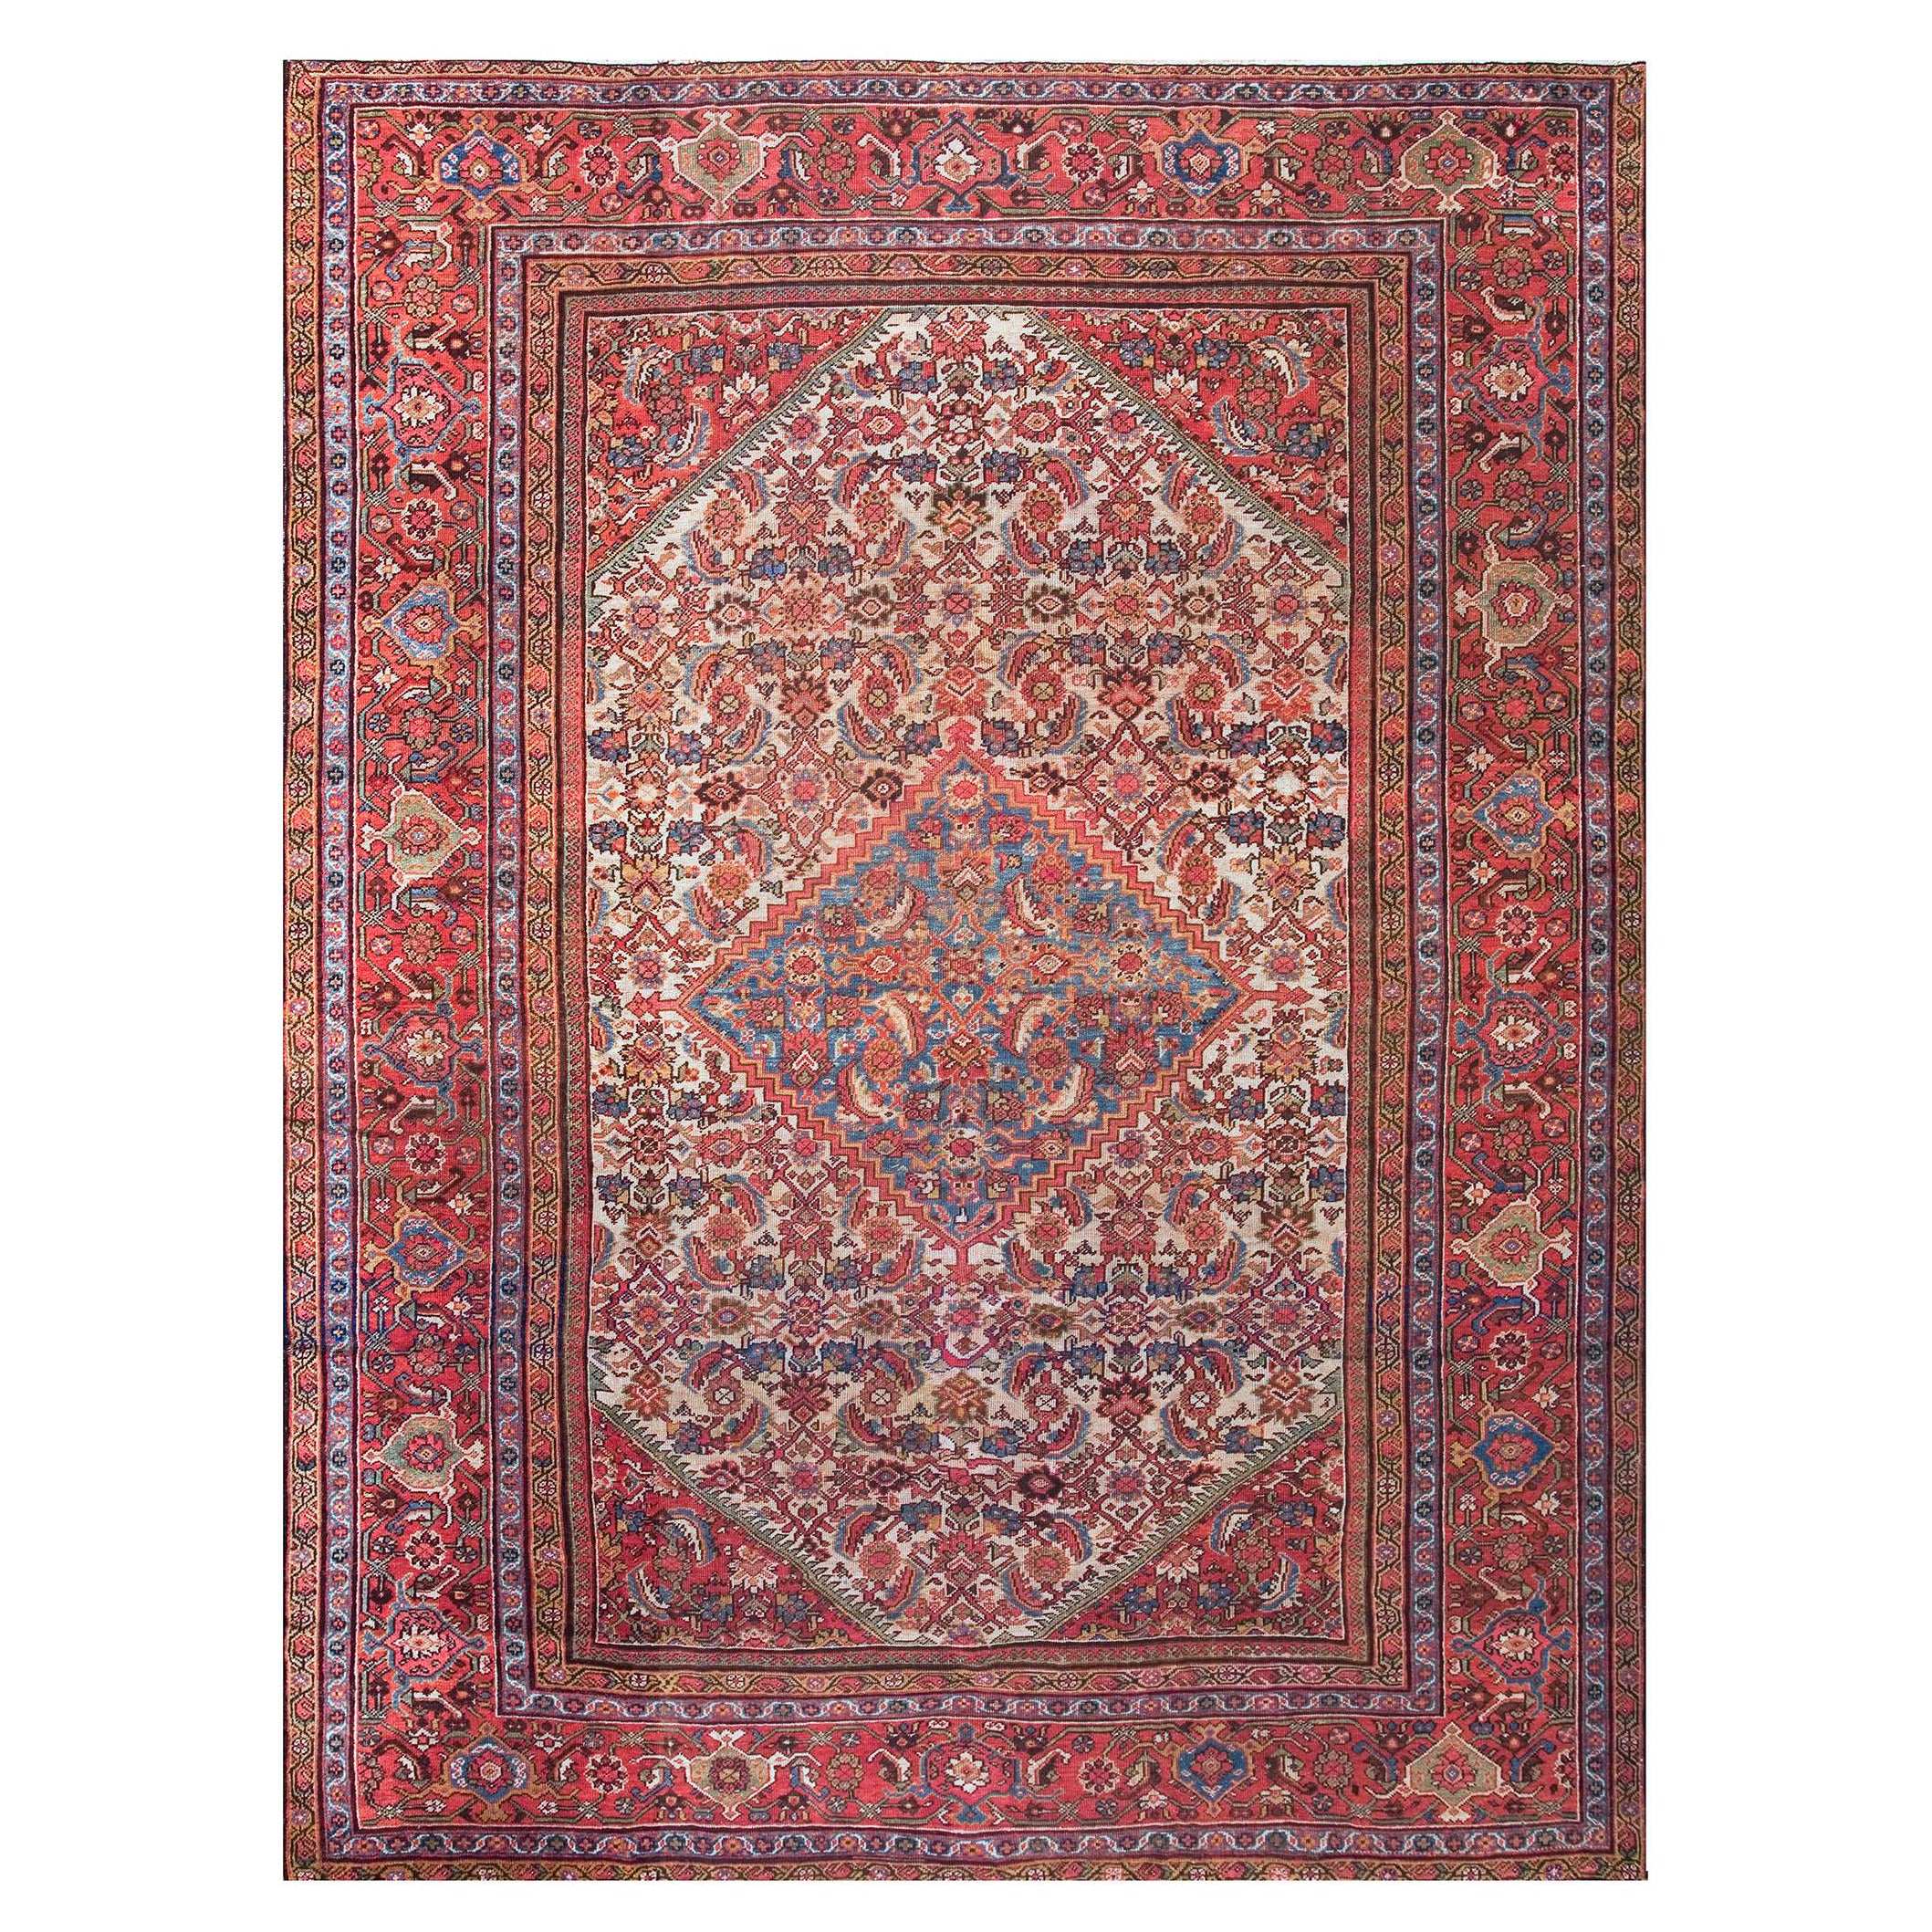 Antique Persian Mahal Rug 9' 2'' x 12' 0''. For Sale